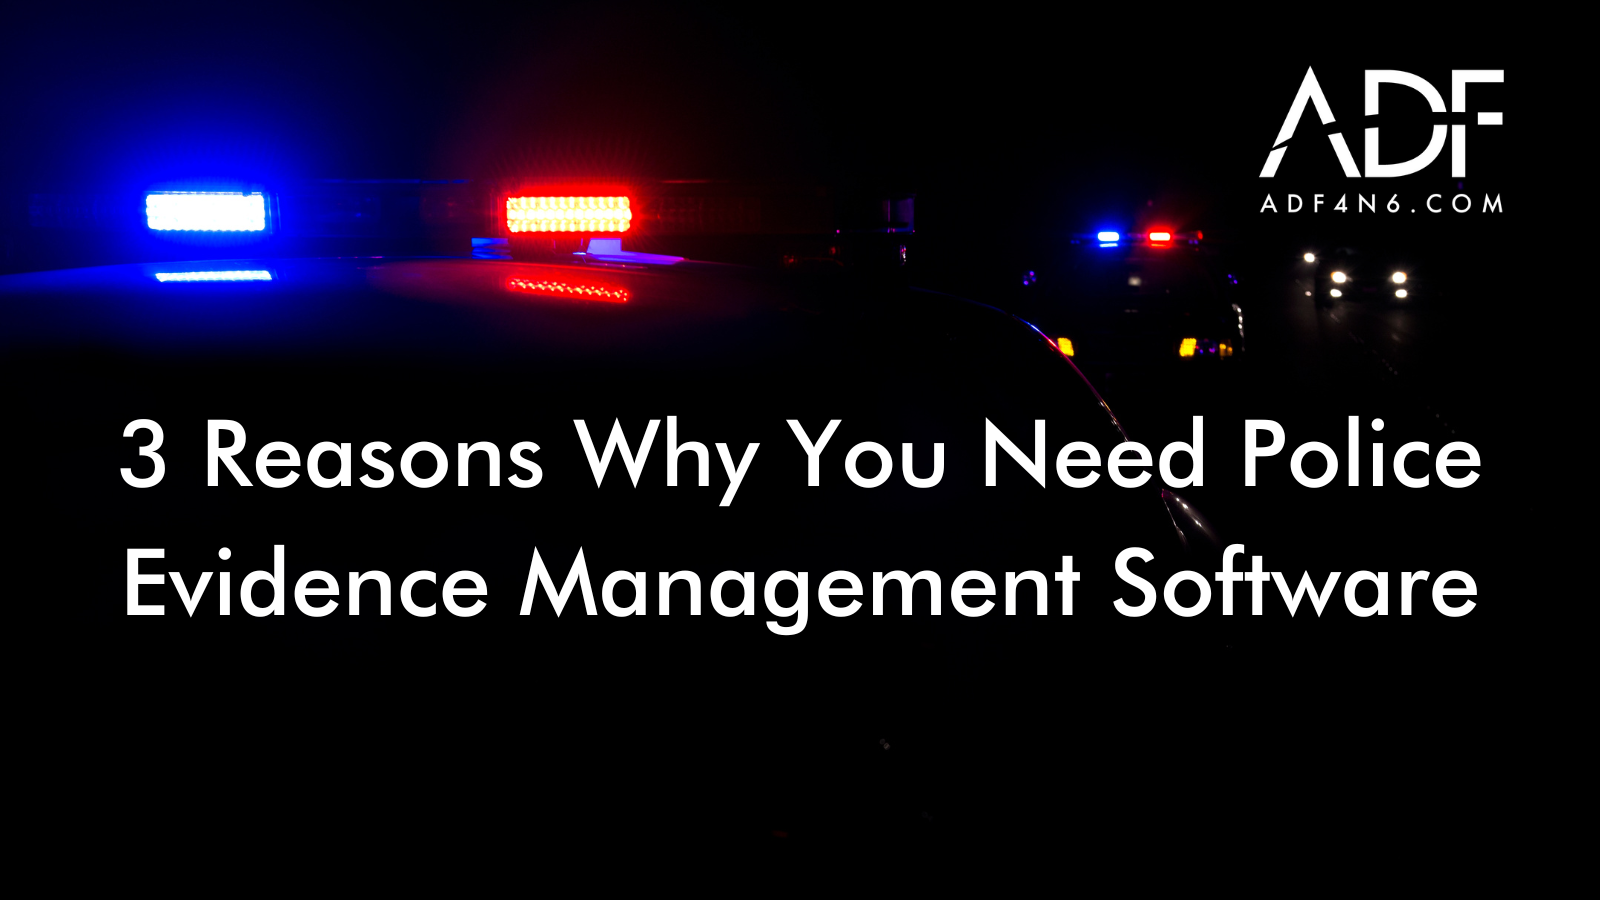 3 Reasons Why You Need Police Evidence Management Software